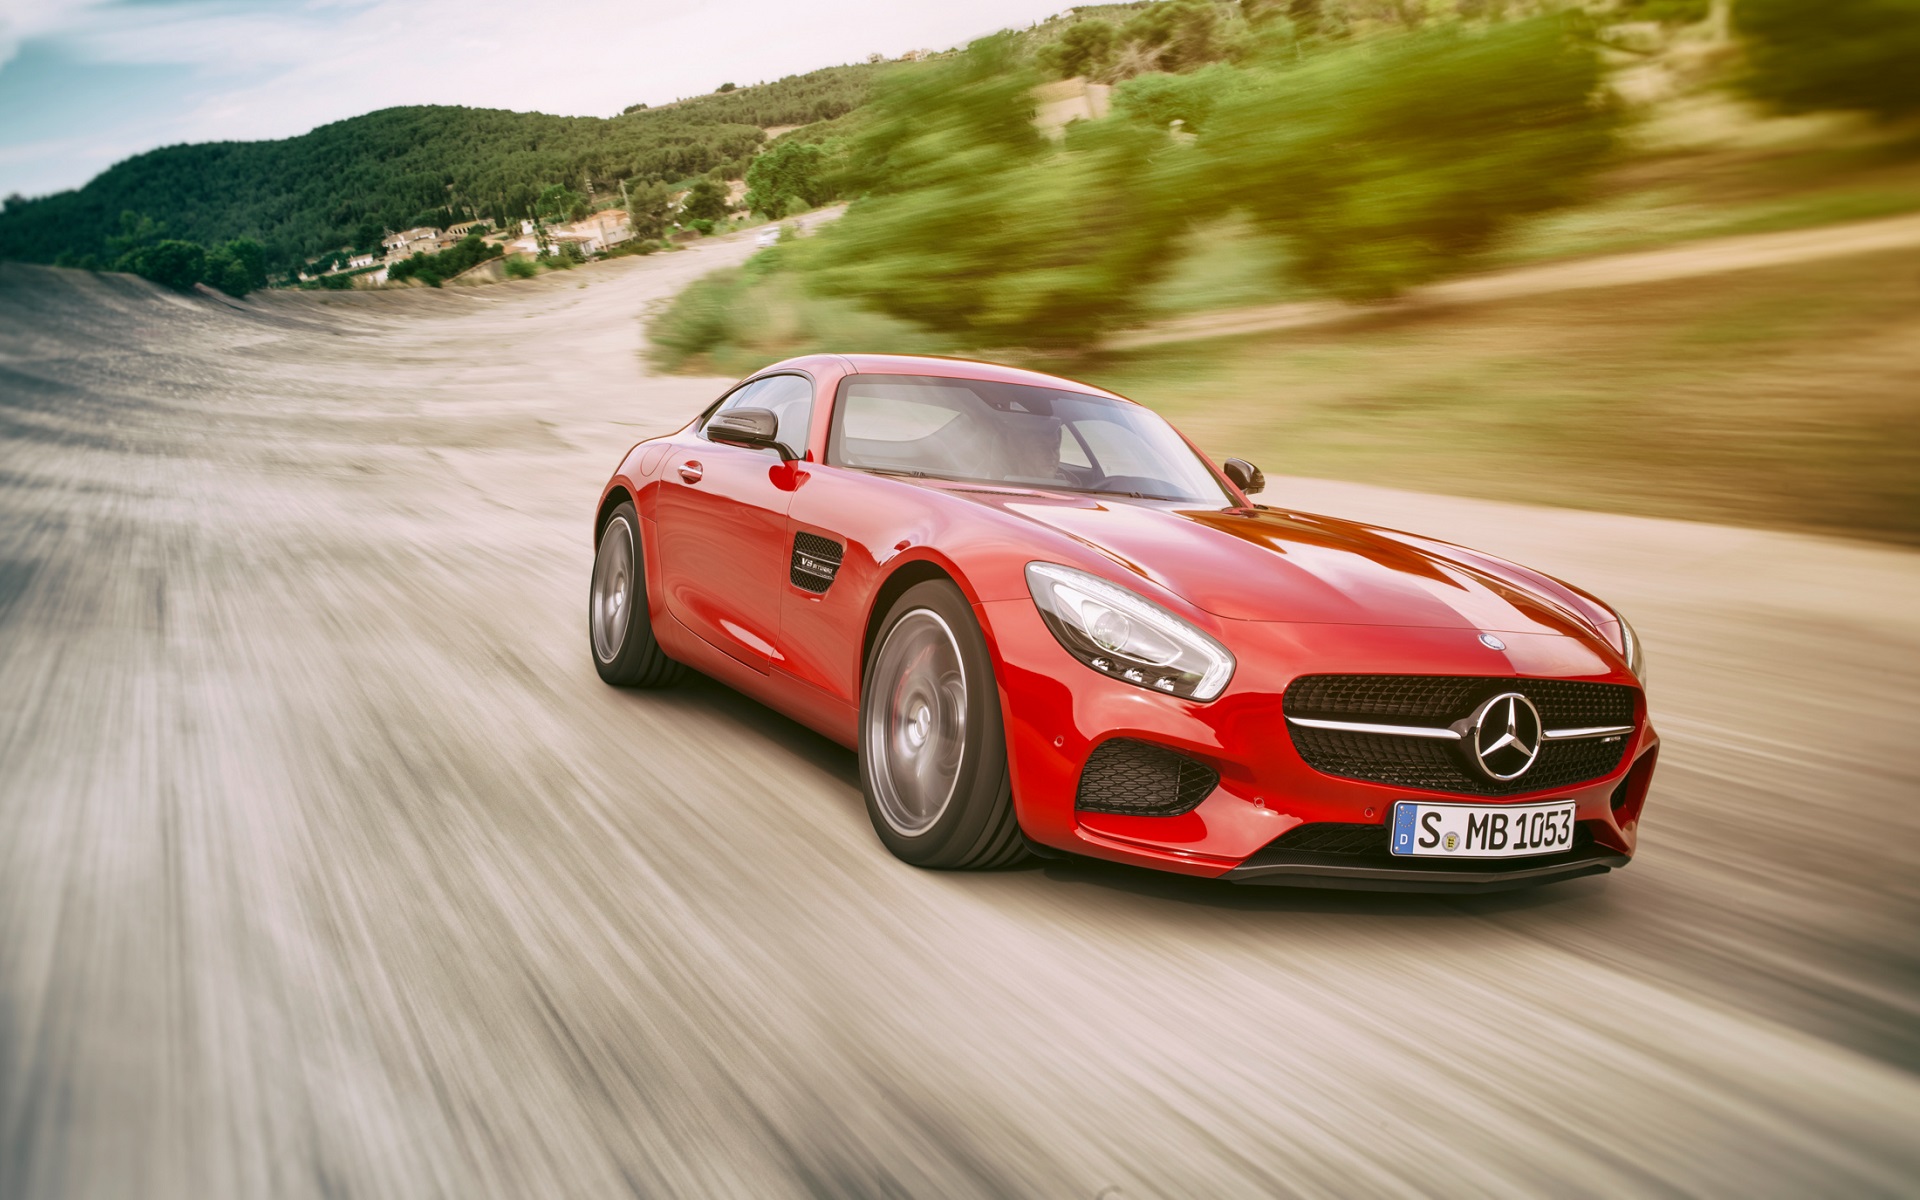 General 1920x1200 Mercedes-AMG GT Mercedes-Benz car red cars road motion blur numbers vehicle German cars Grand Tour